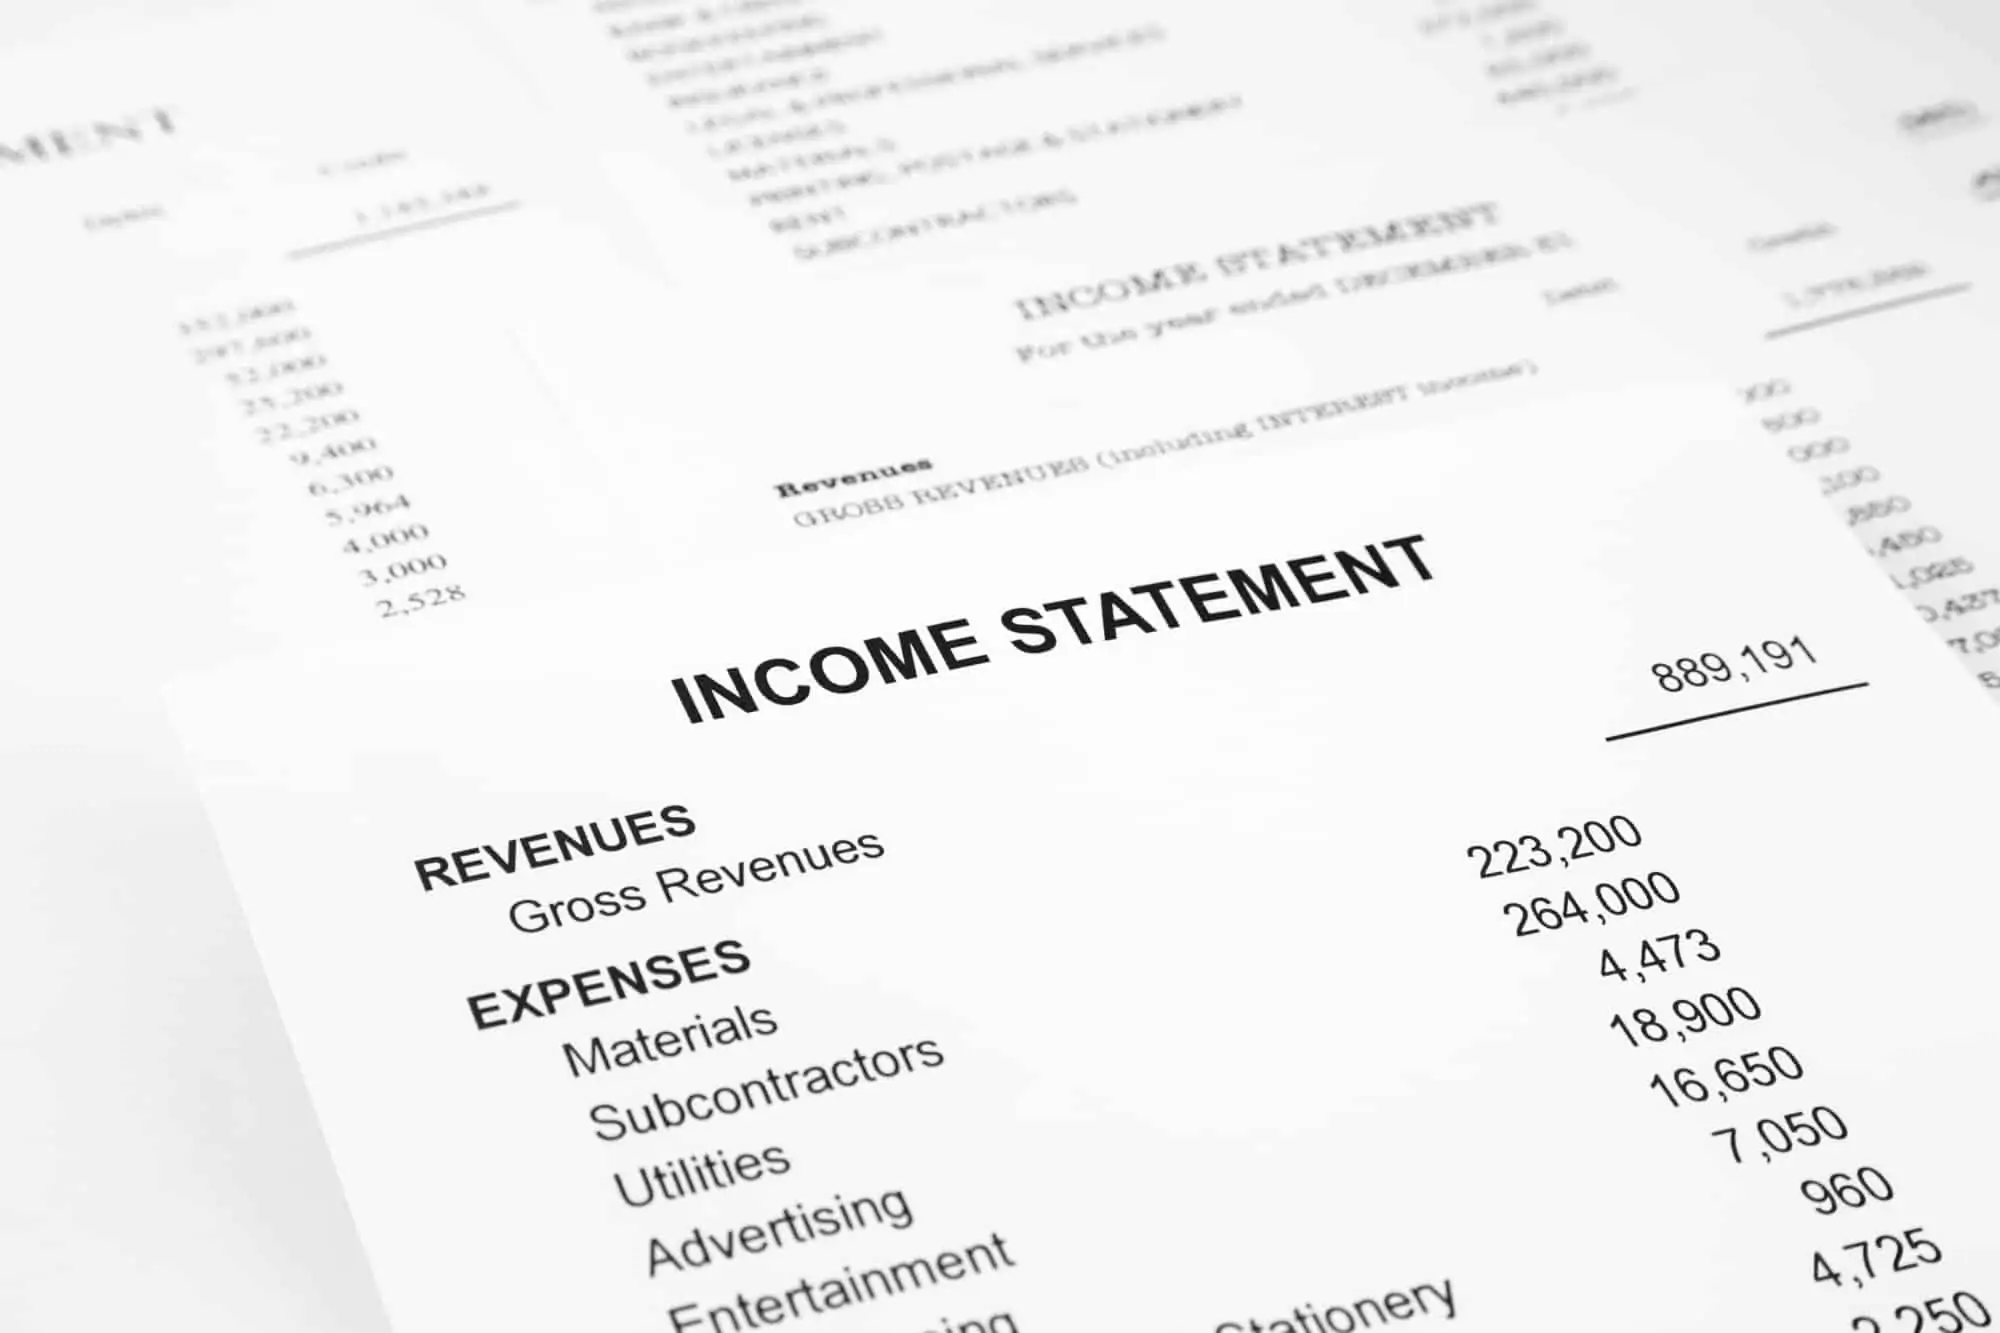 Income statement showing revenues and business expenses